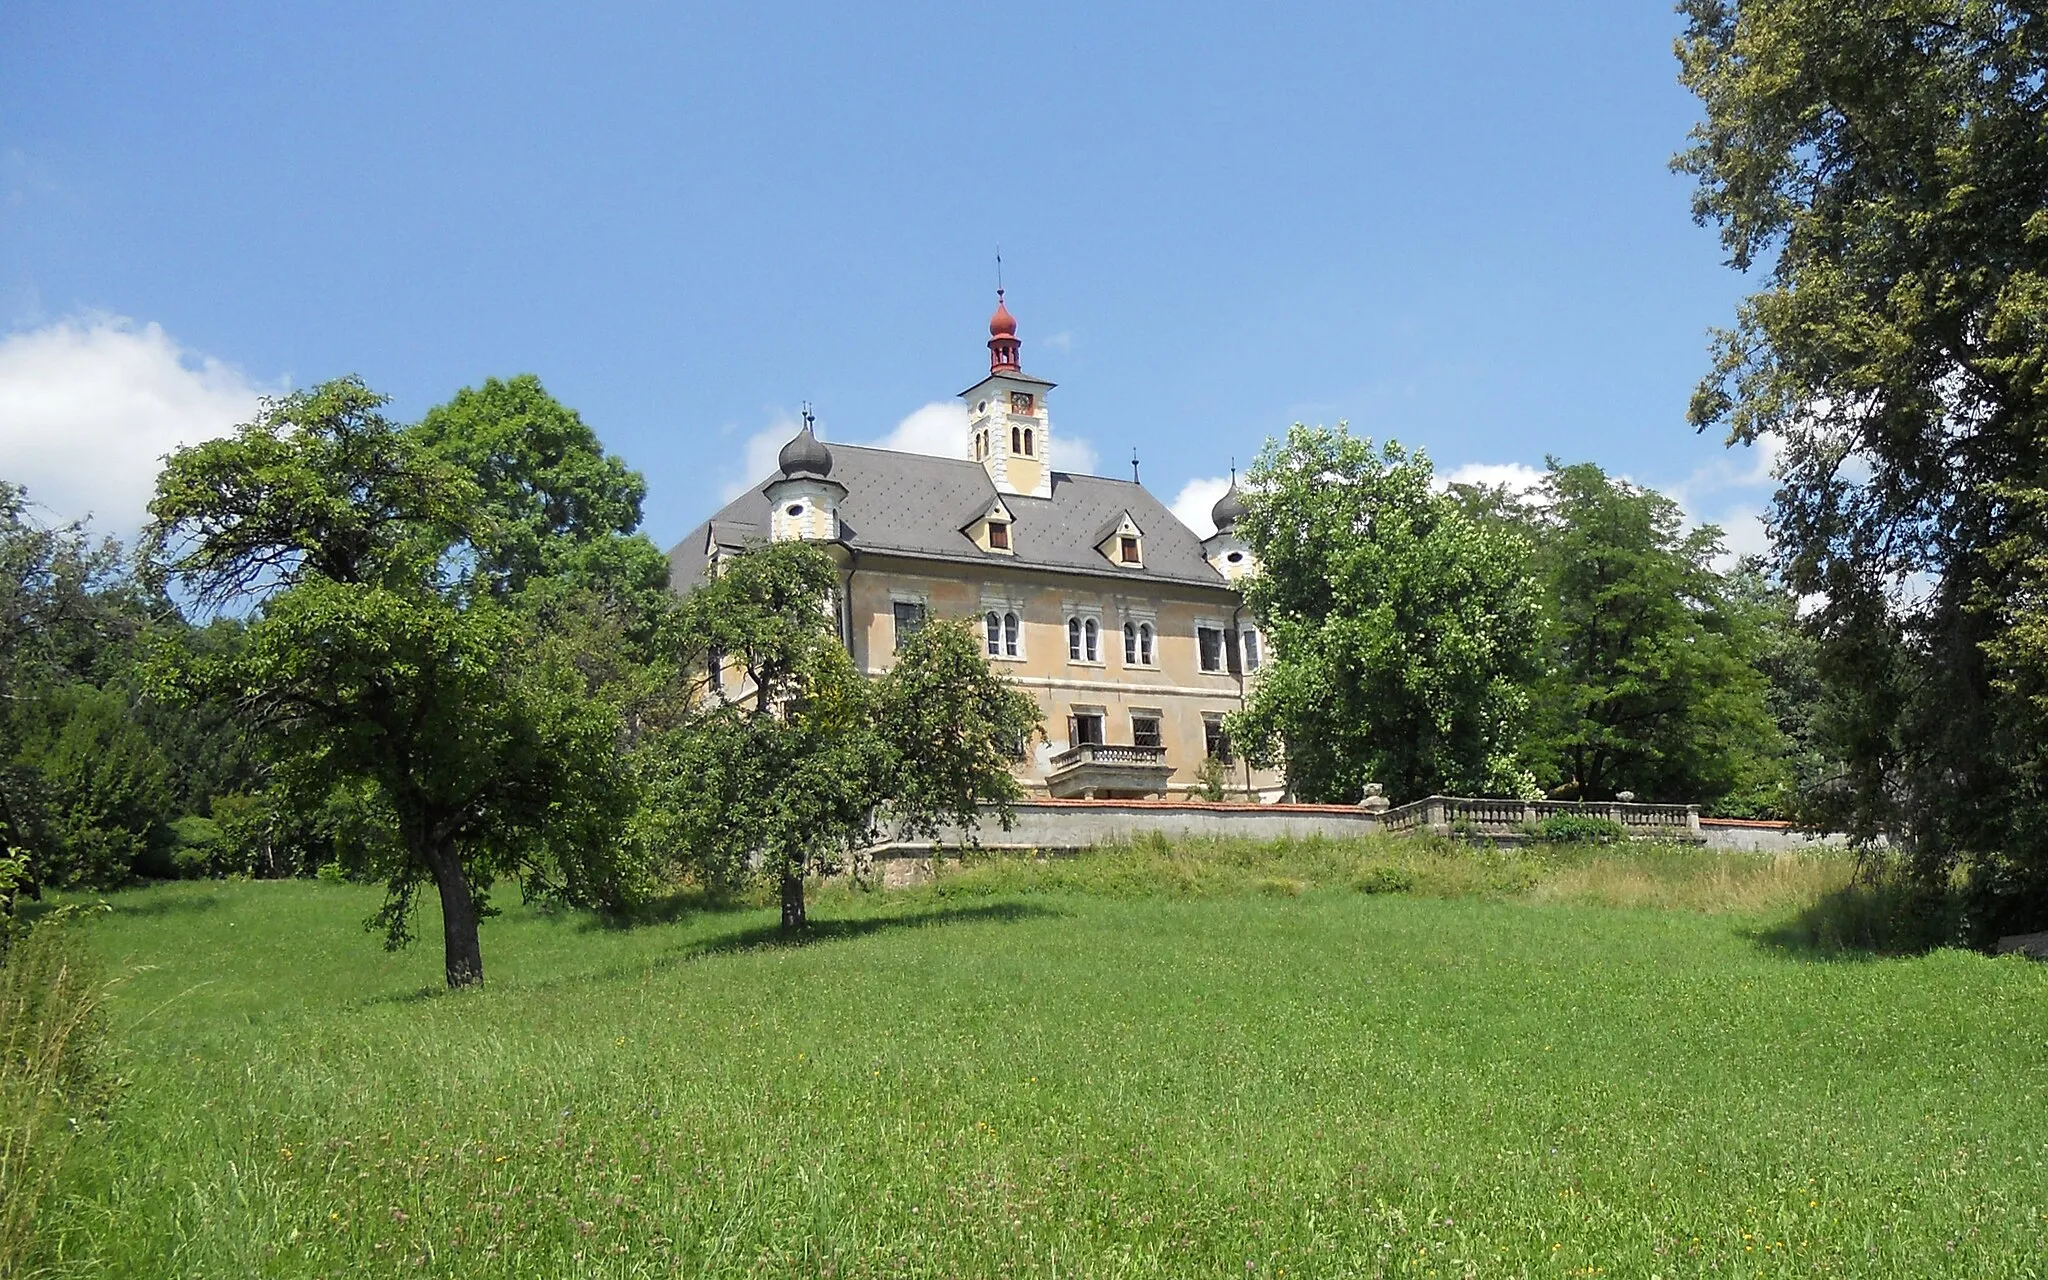 Photo showing: Renaissance castle Spielberg, built in 1570 - showing south façade and clock tower.